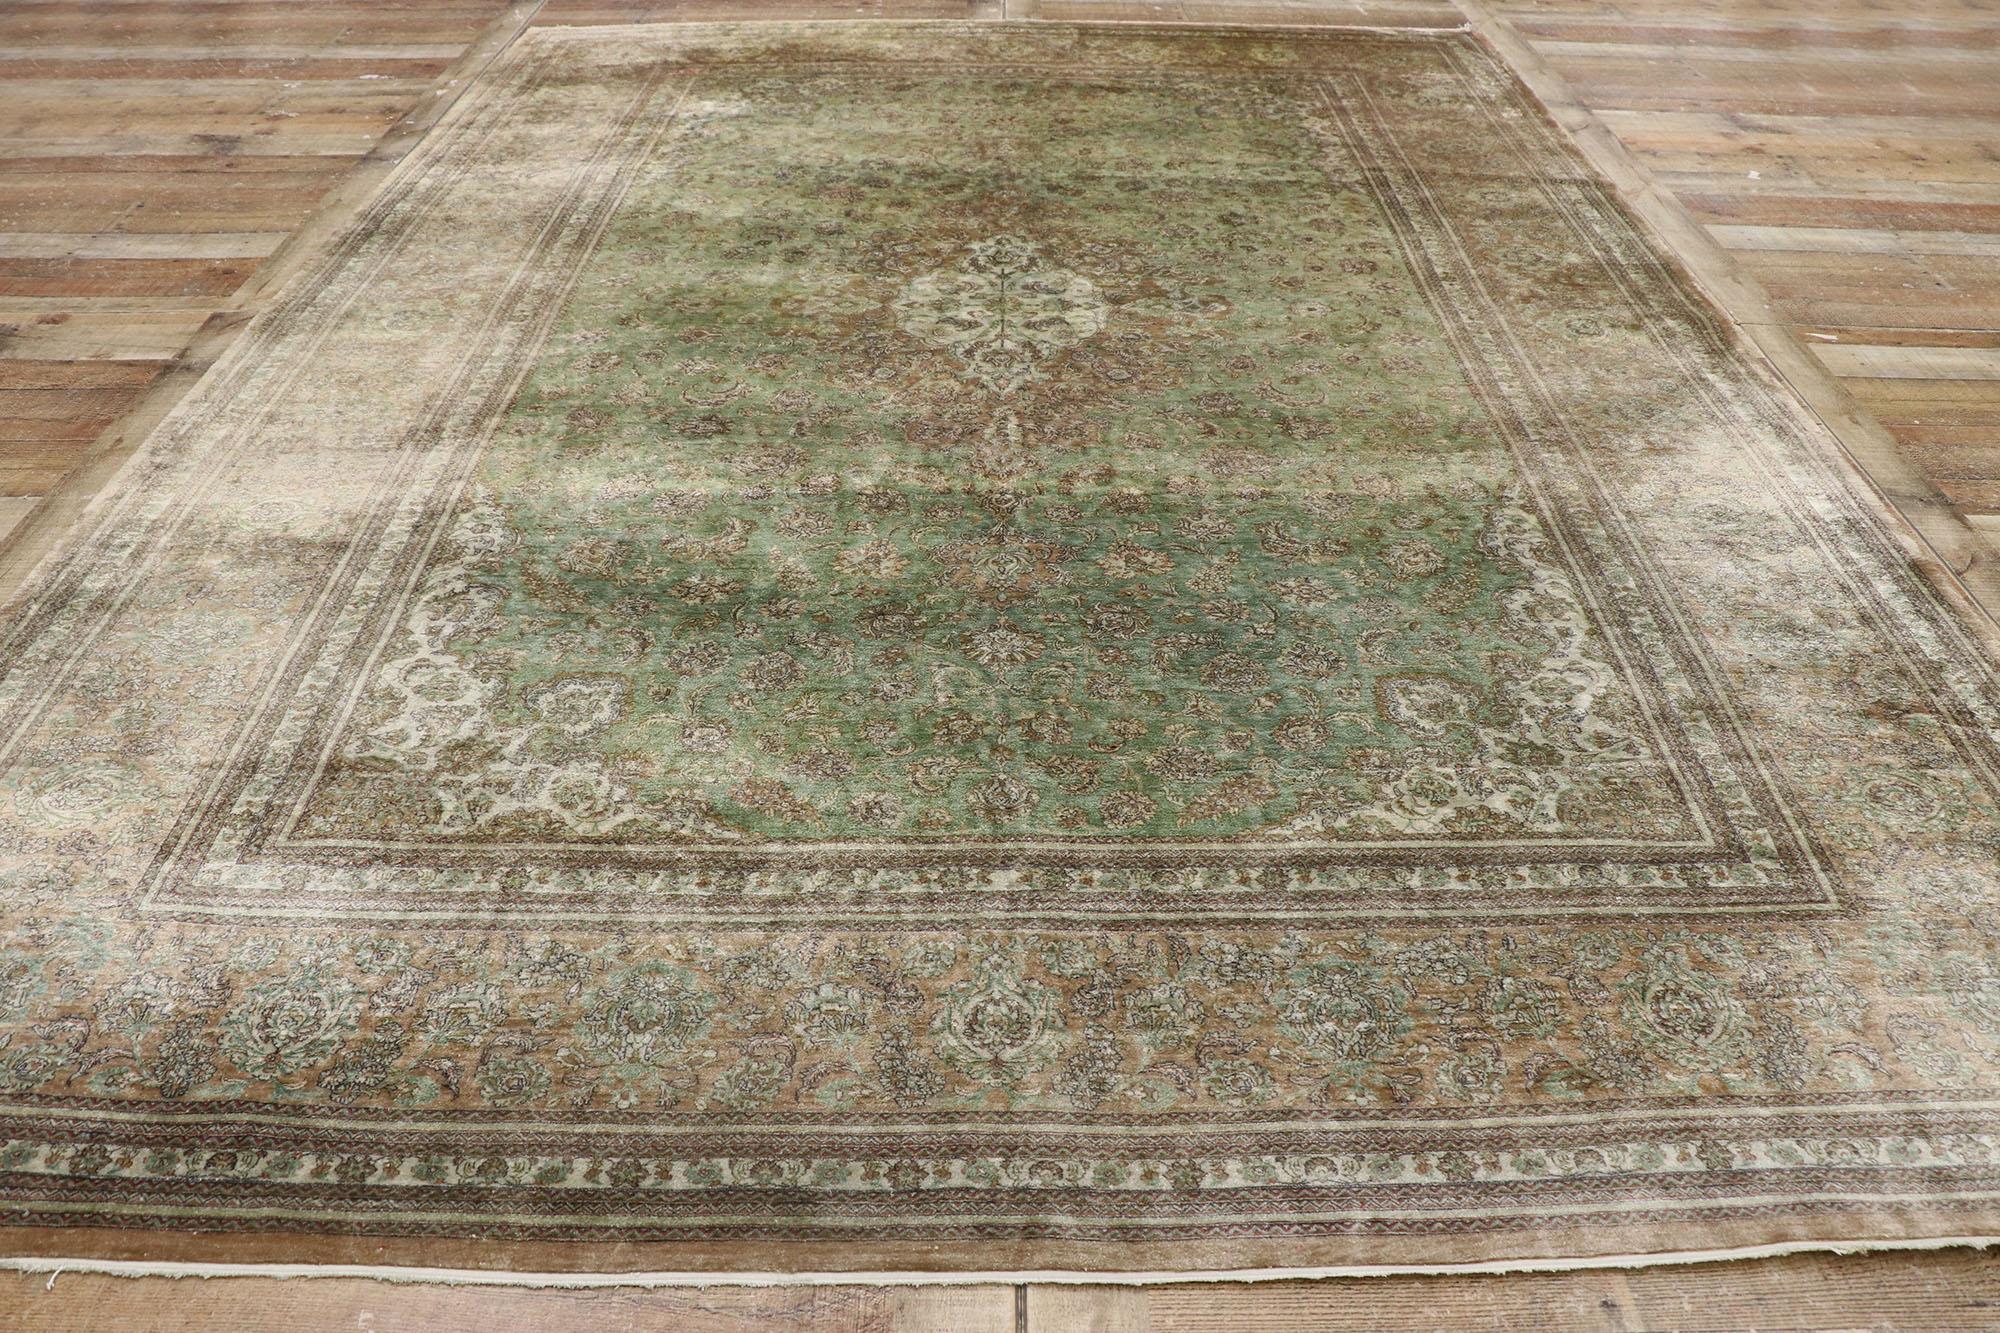 Vintage Persian Silk Qum Rug with Warm Earth-Tone Colors 2